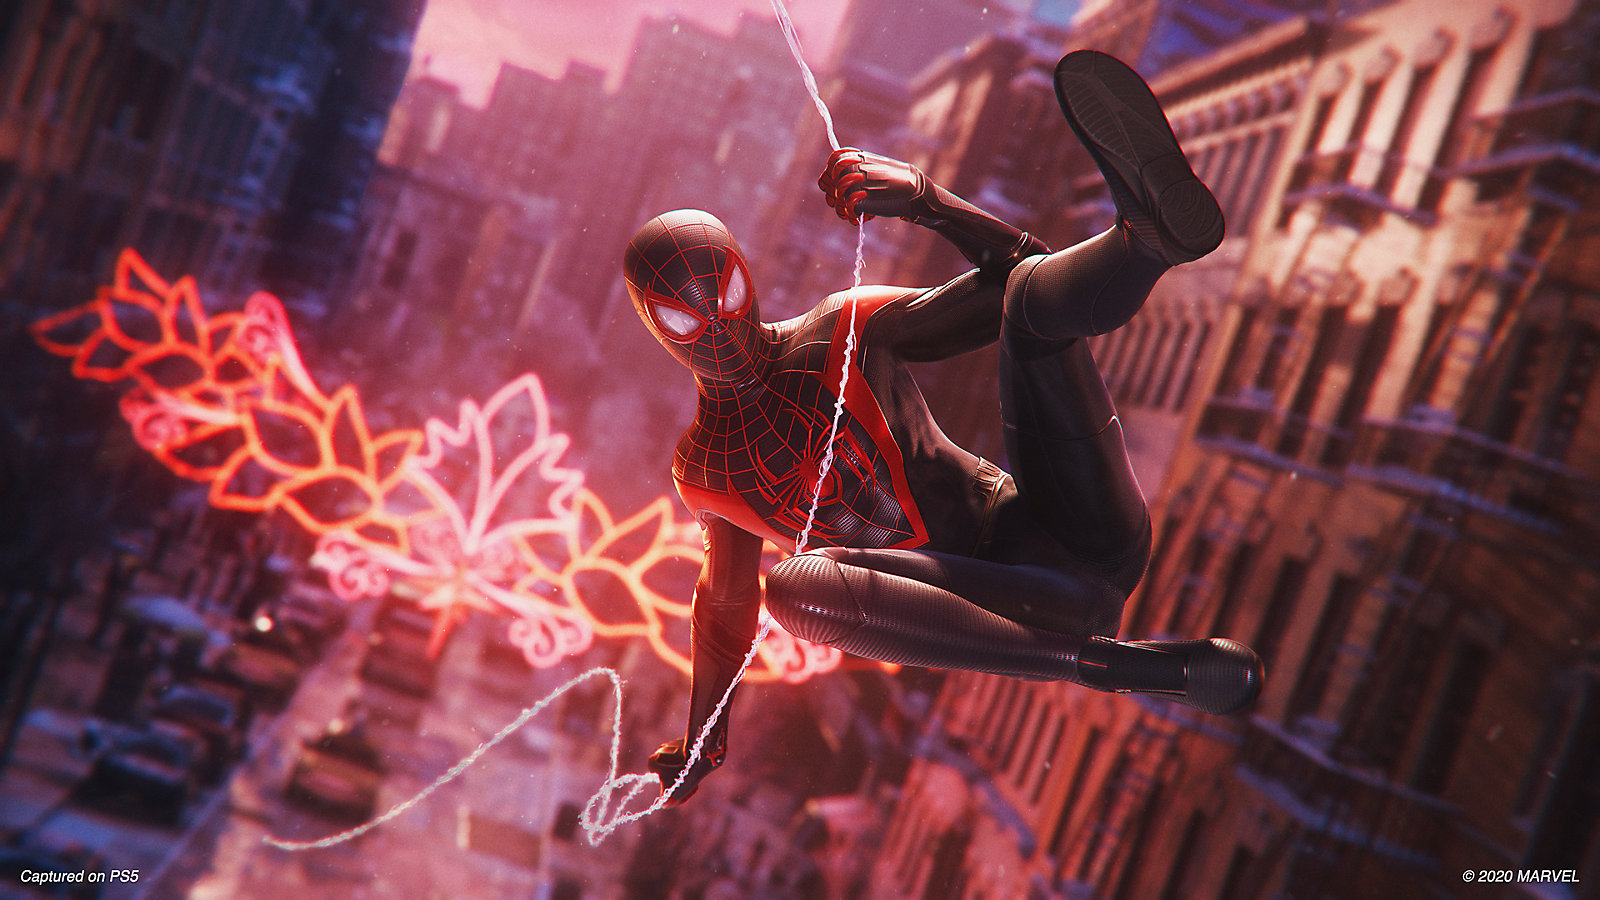 Media asset (photo, screenshot, or image in full size) related to contents posted at 3dfxzone.it | Image Name: spiderman-miles-morales-official-screenshot.jpg